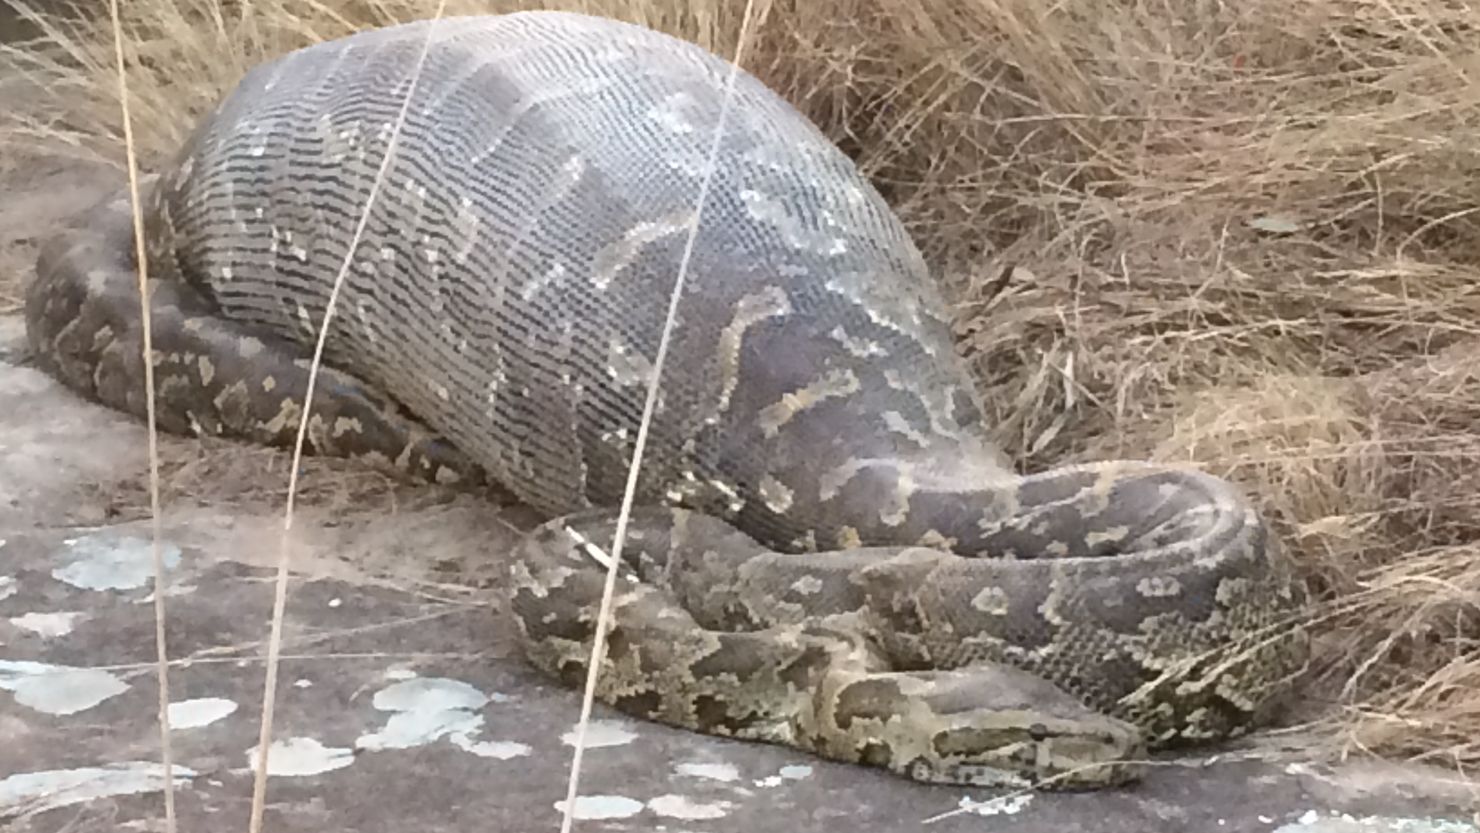 A python died after eating a porcupine at the Lake Eland Game Reserve in South Africa.